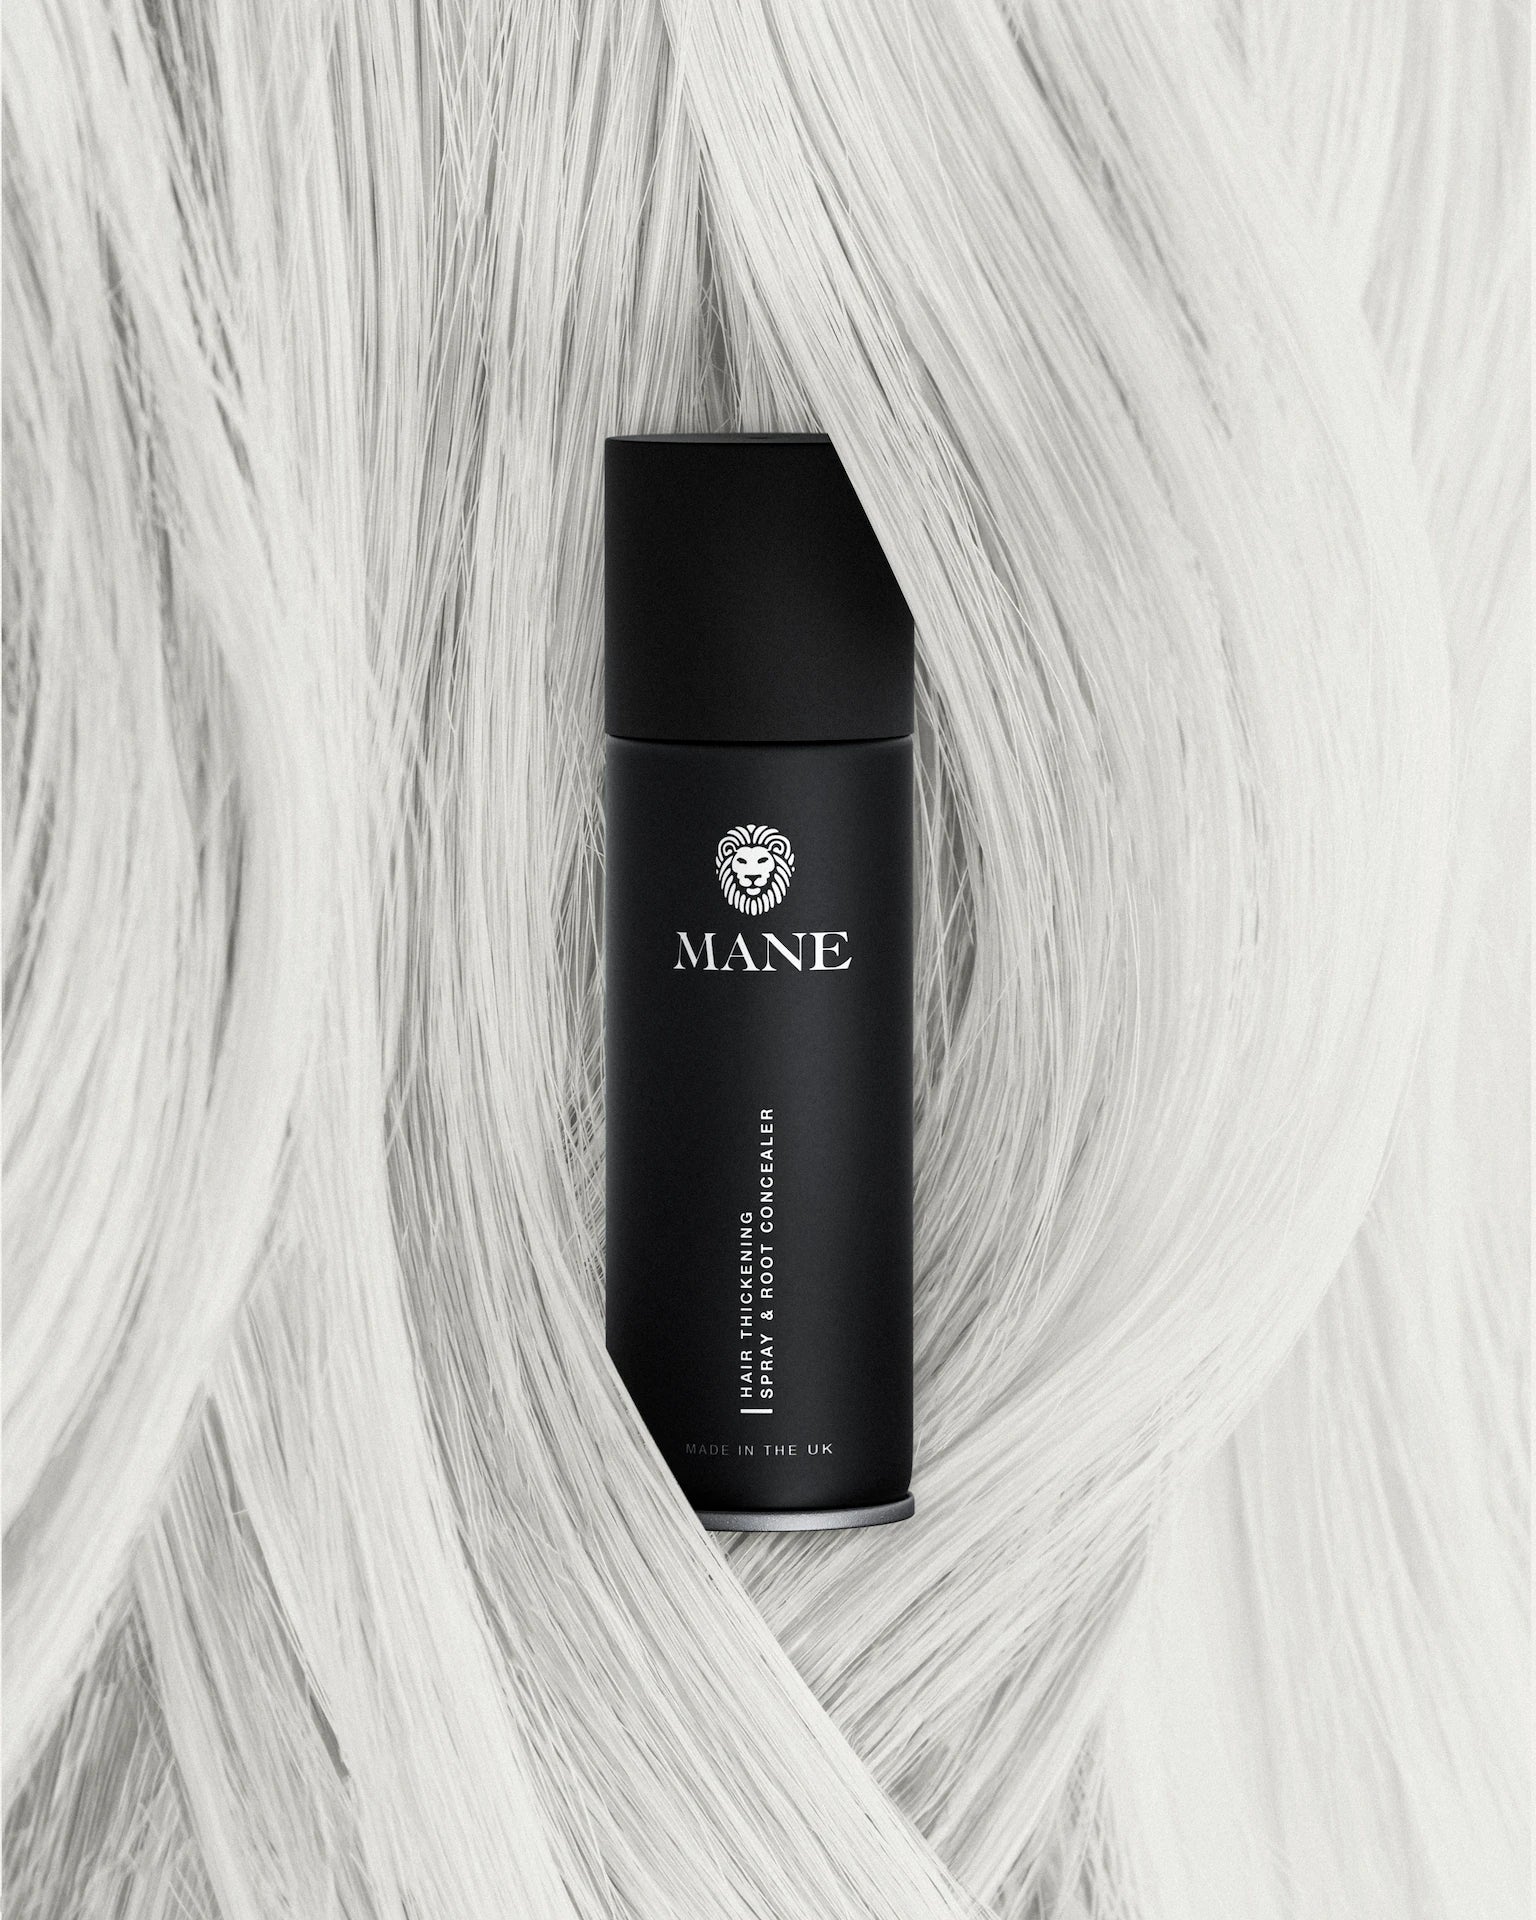 Bumper Mane Hair Thickening Spray Pack – Buy x6 and Get a Free Shampoo